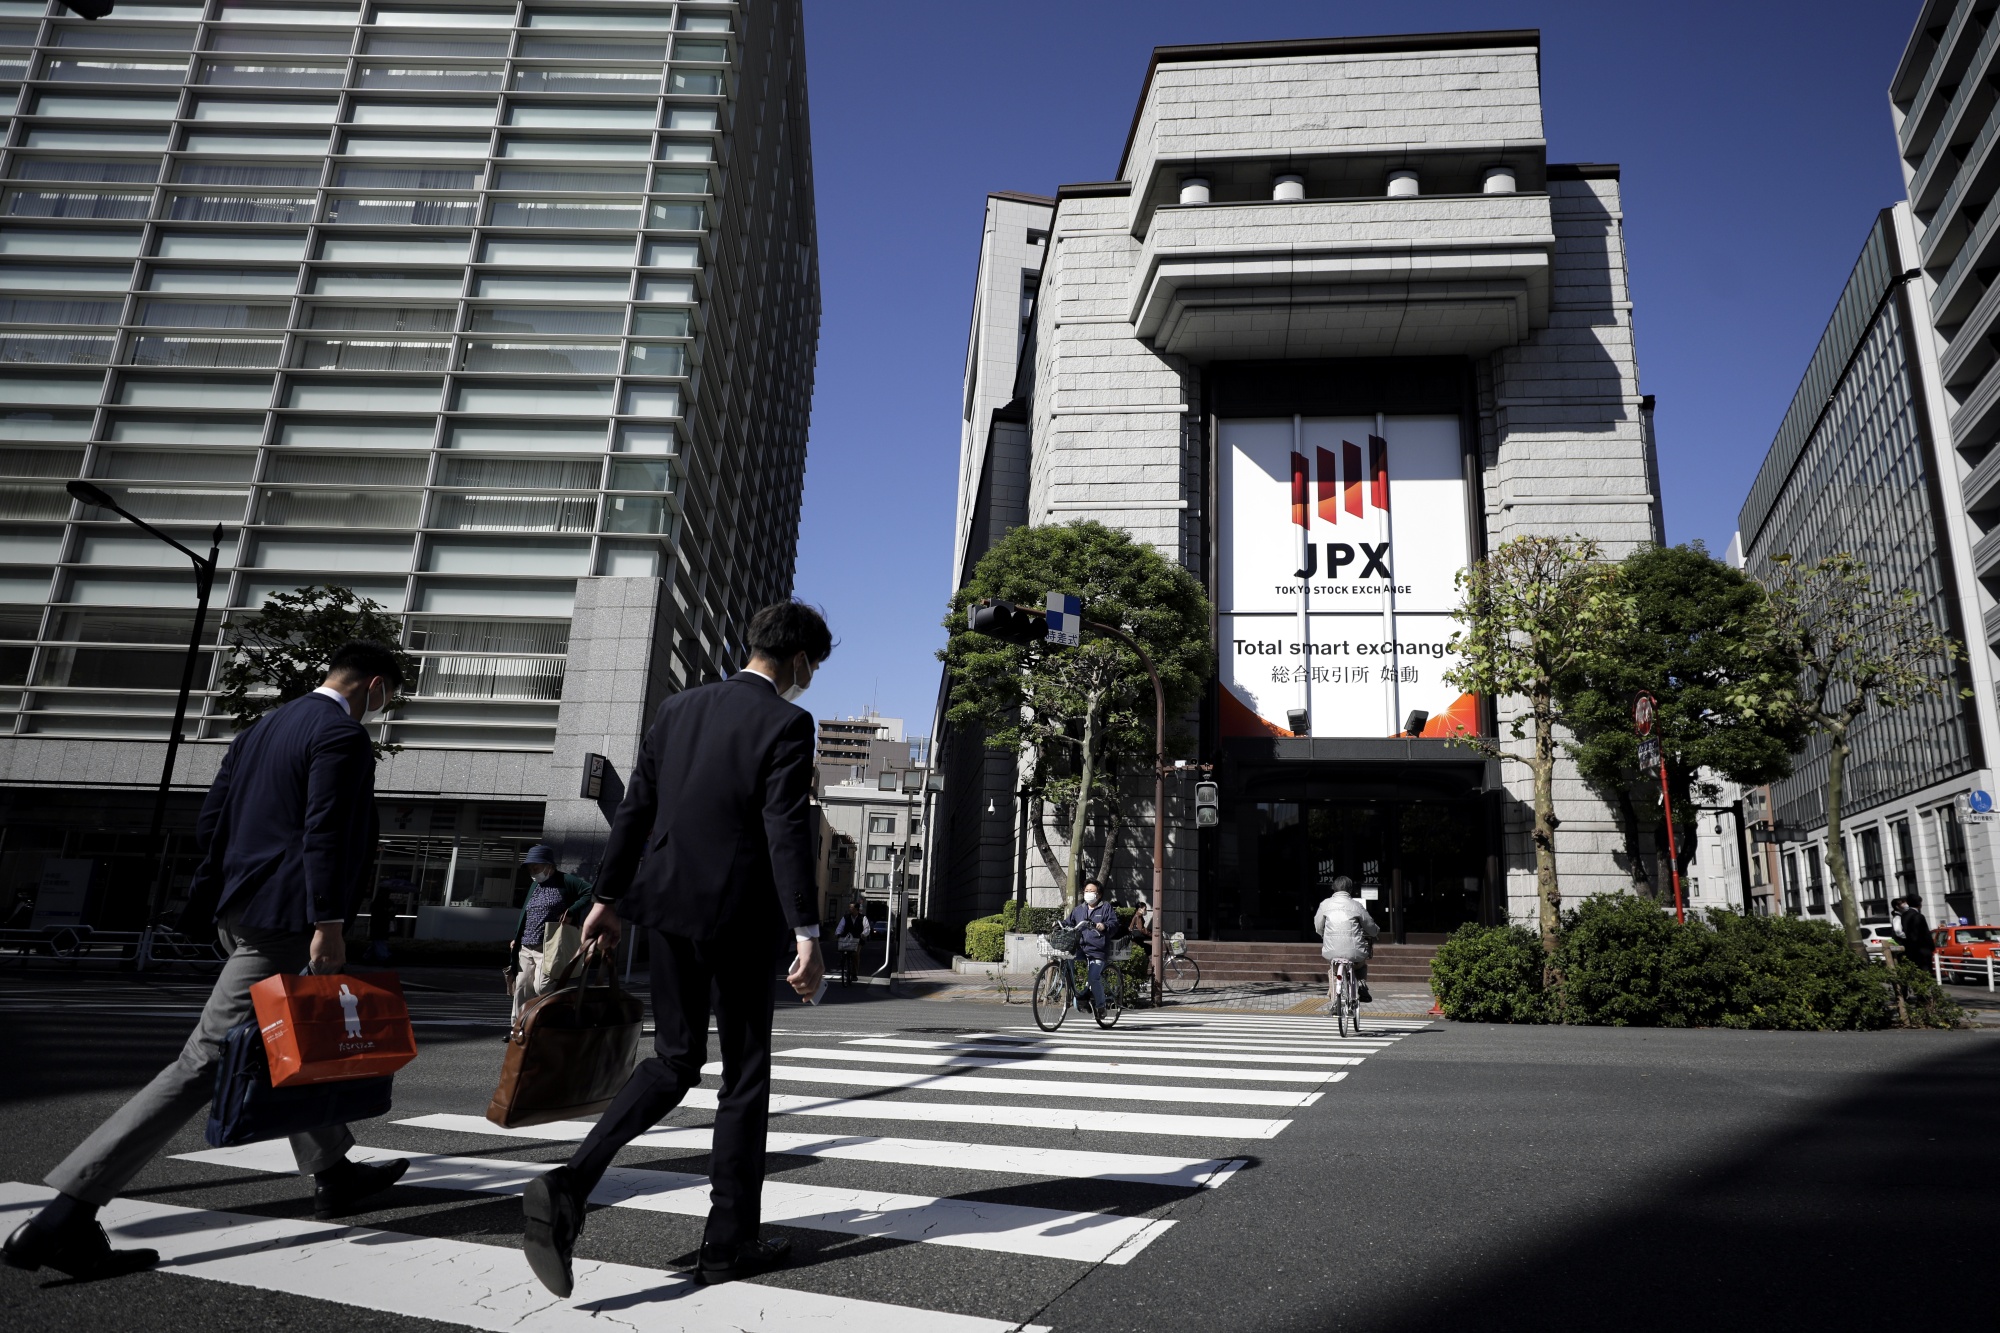 Prime Time: Tokyo Stock Exchange's New Look Goes Into Effect - Bloomberg